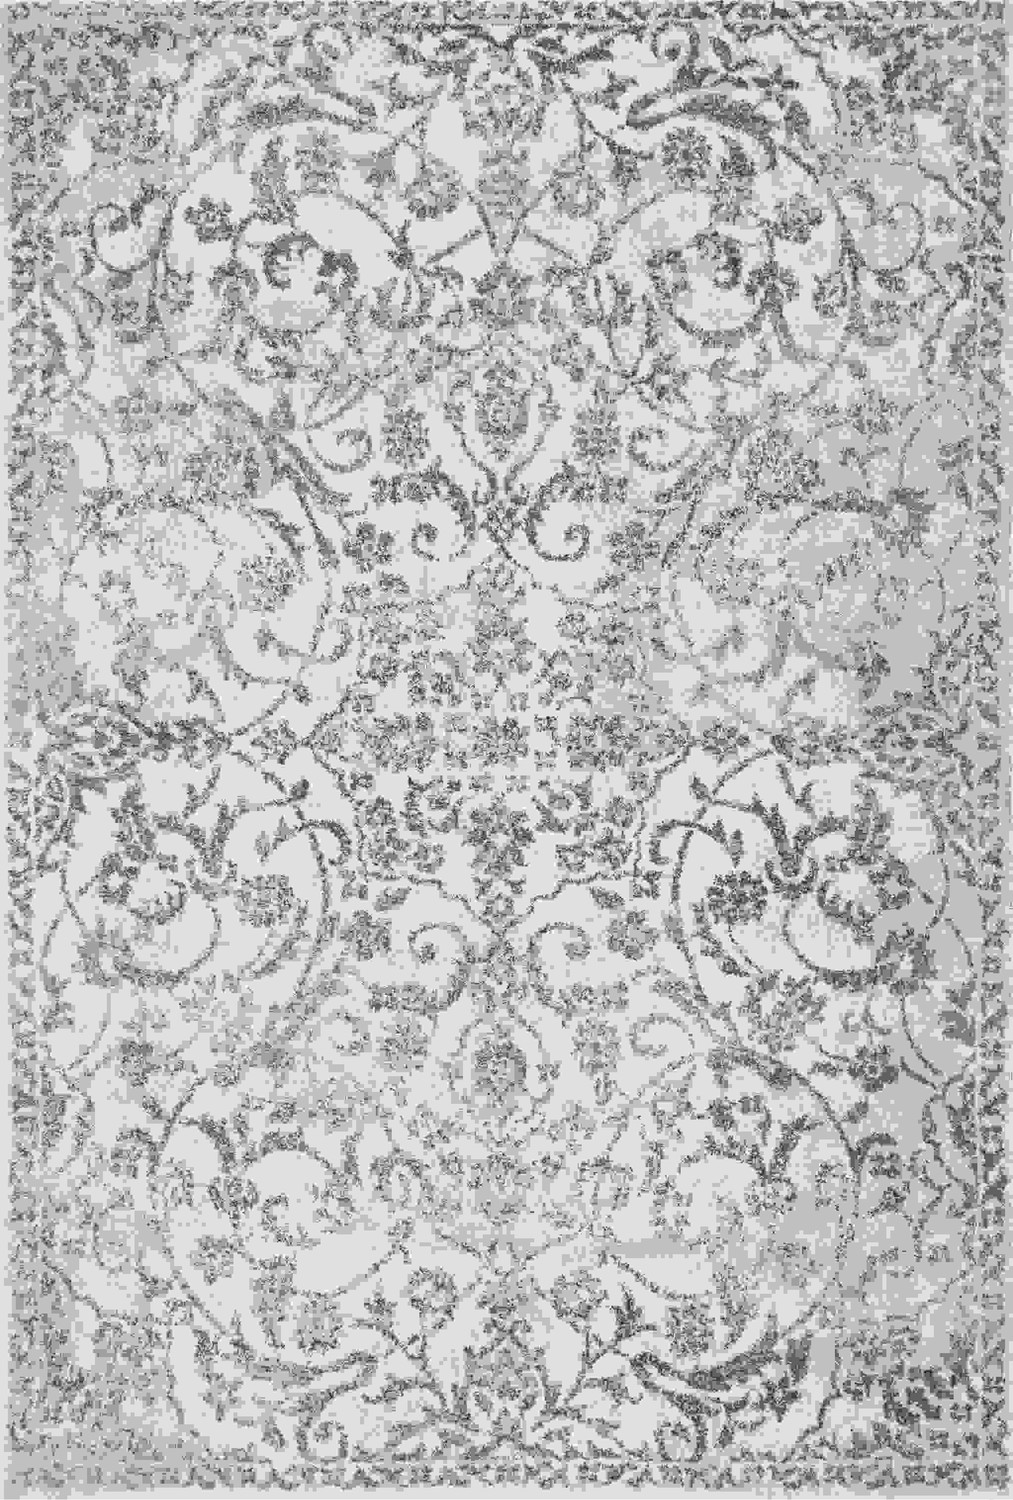 8' x 13' Ivory and Gray Floral Scroll Area Rug